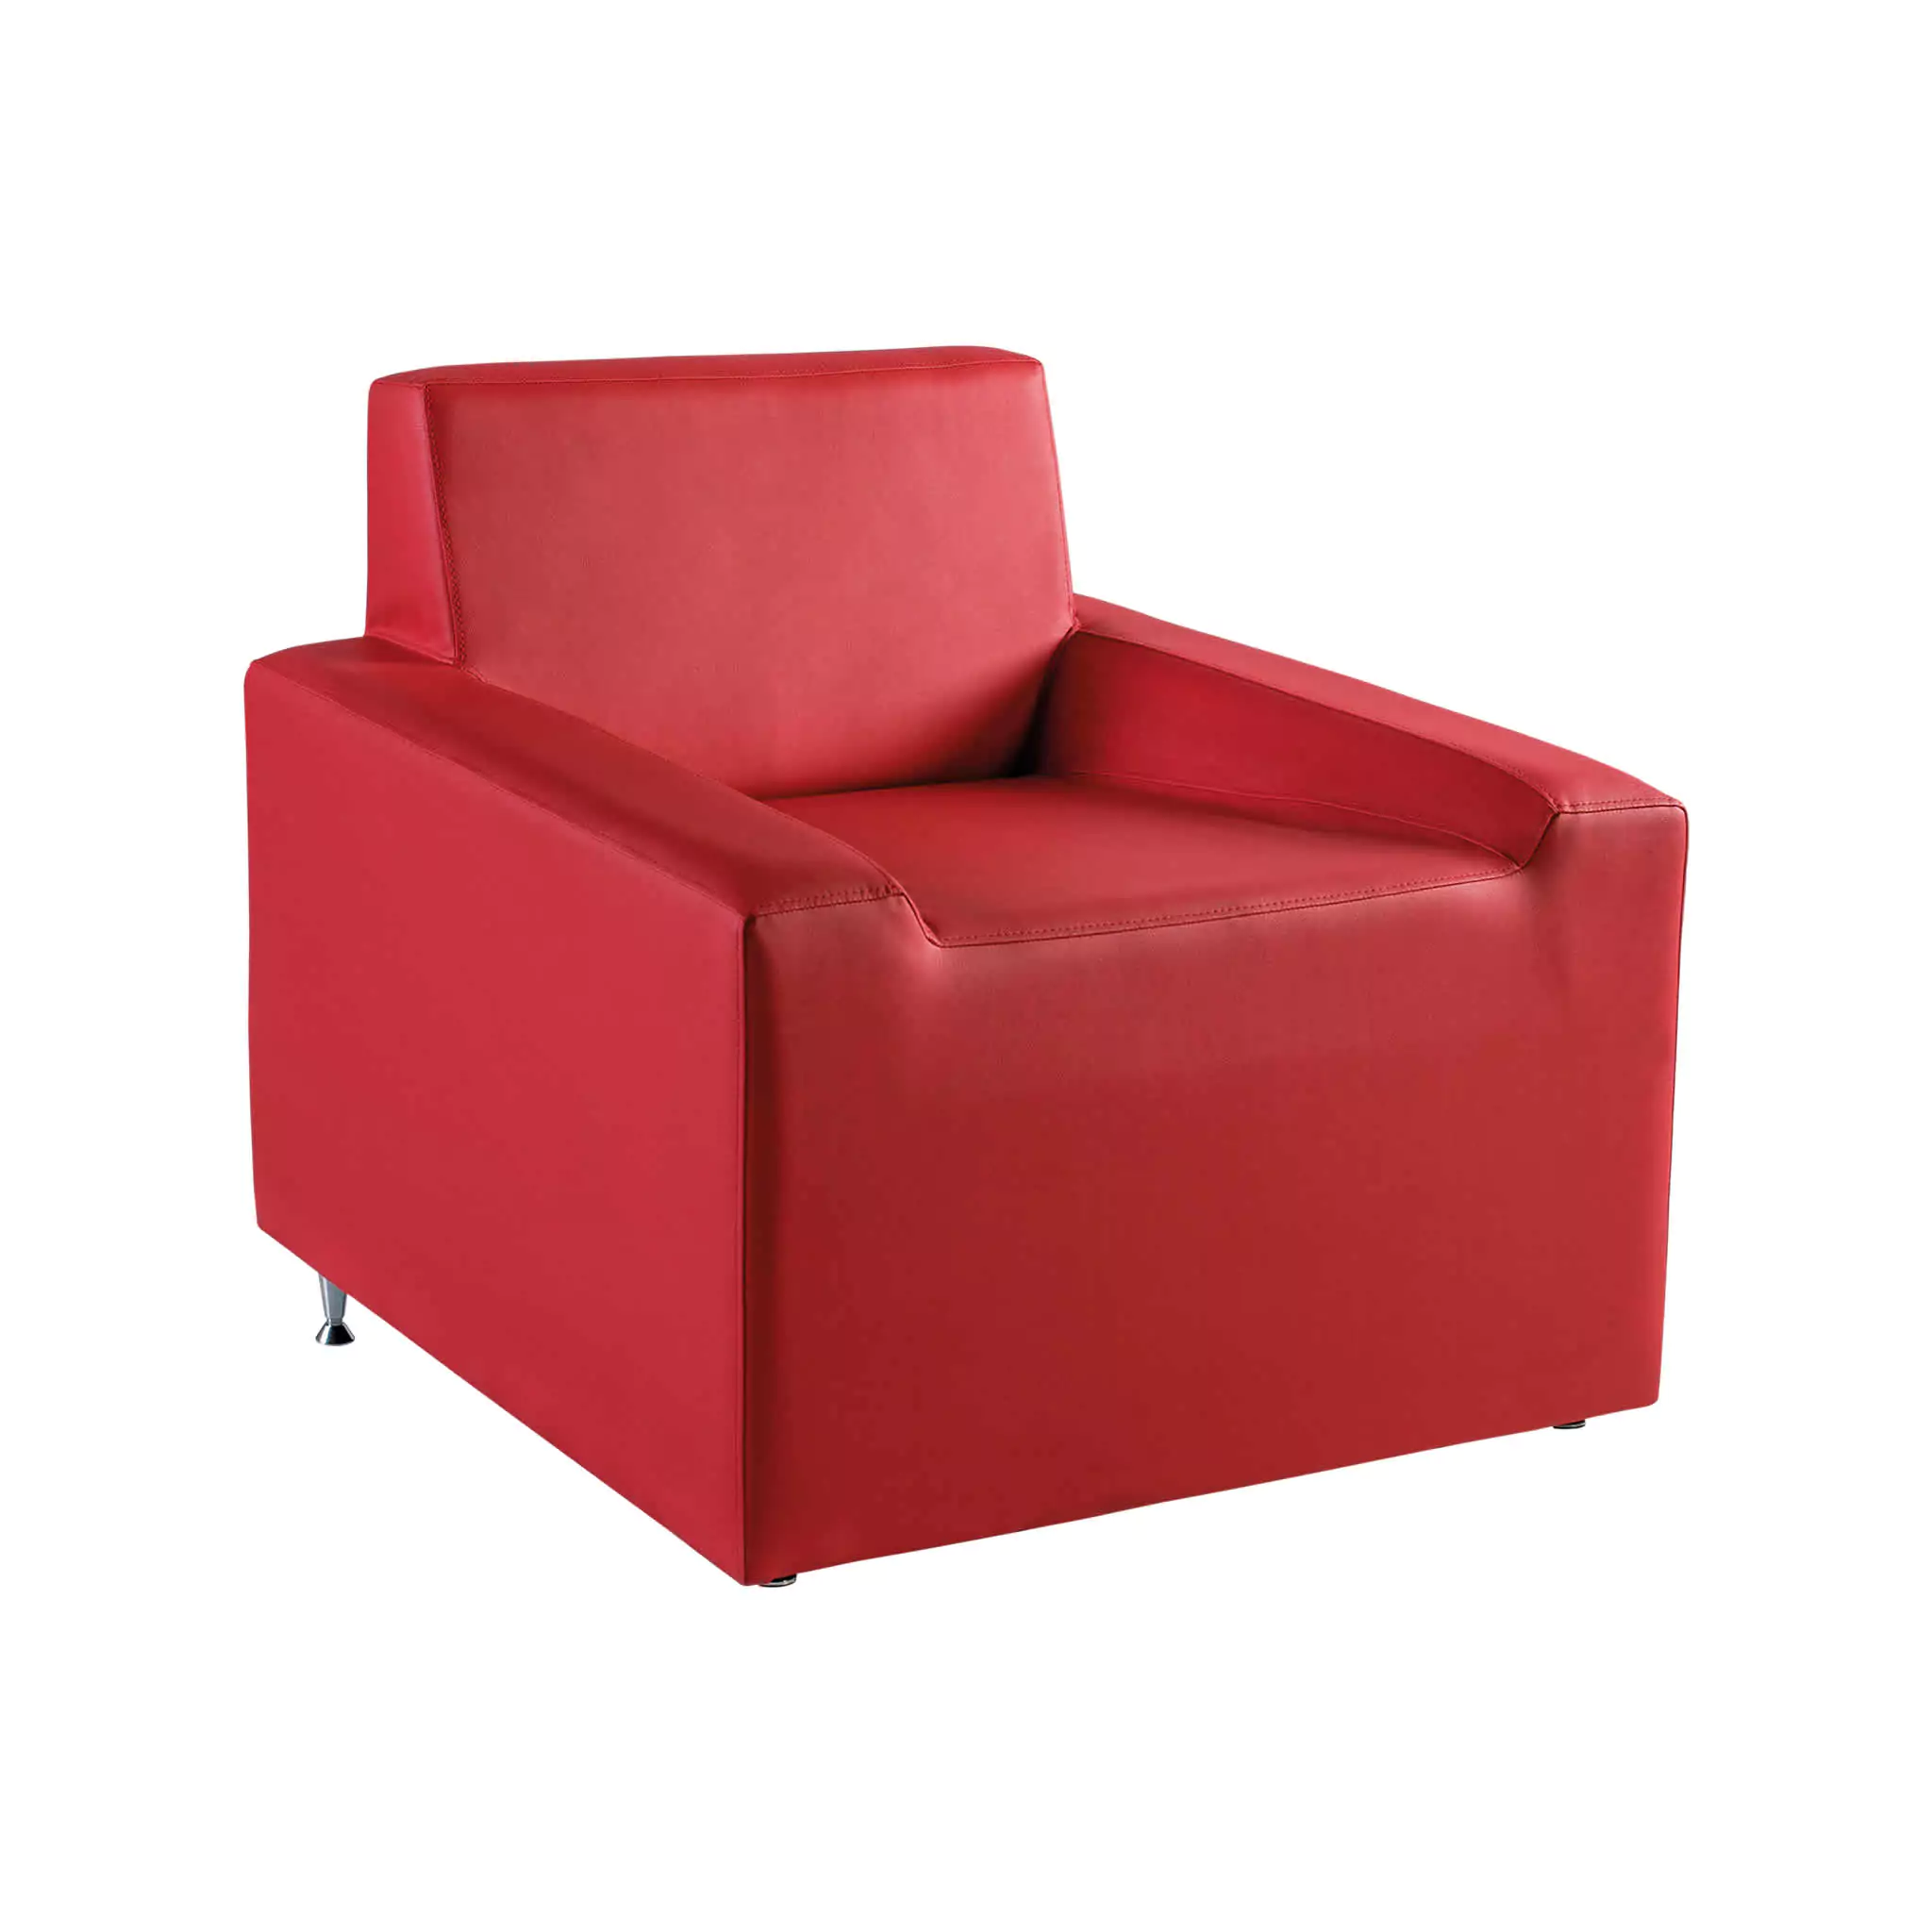 Simko Seating Product Foyer Chair Lal